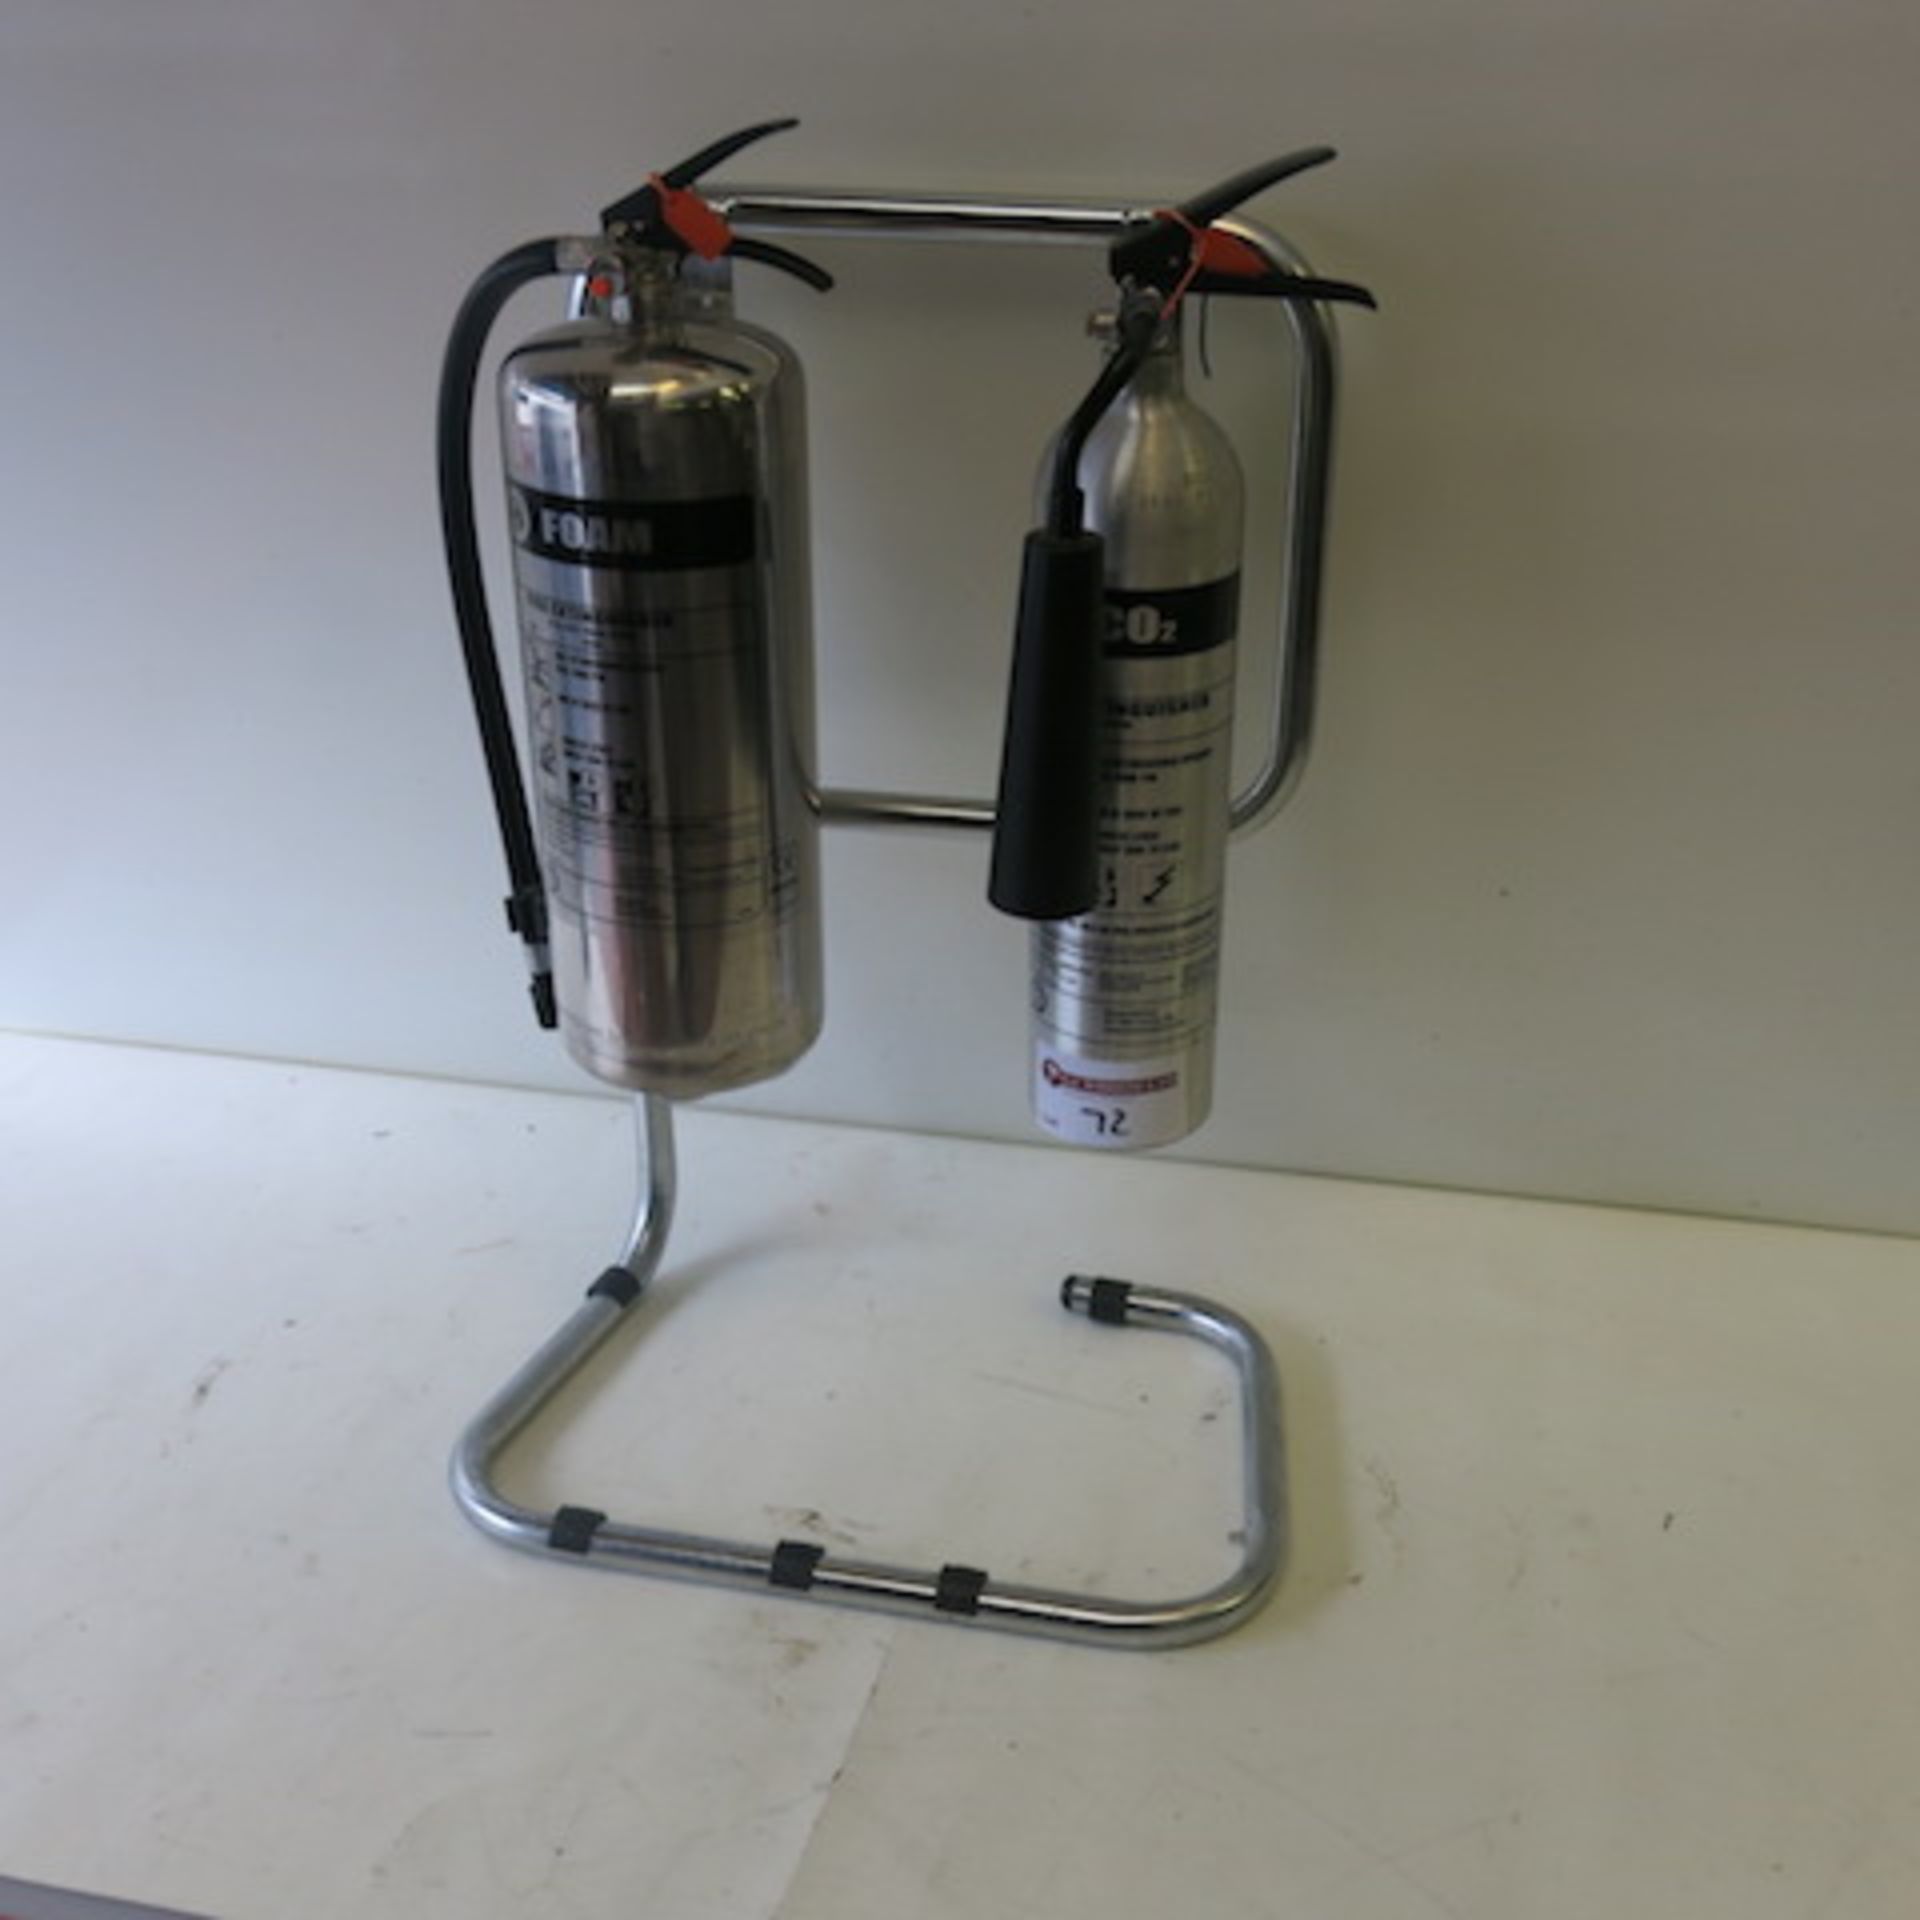 2 x Stainless Steel/Aluminum Fire Extinguishers on Frame, 1 Foam, 1 Carbon Dioxide, Discharge Date